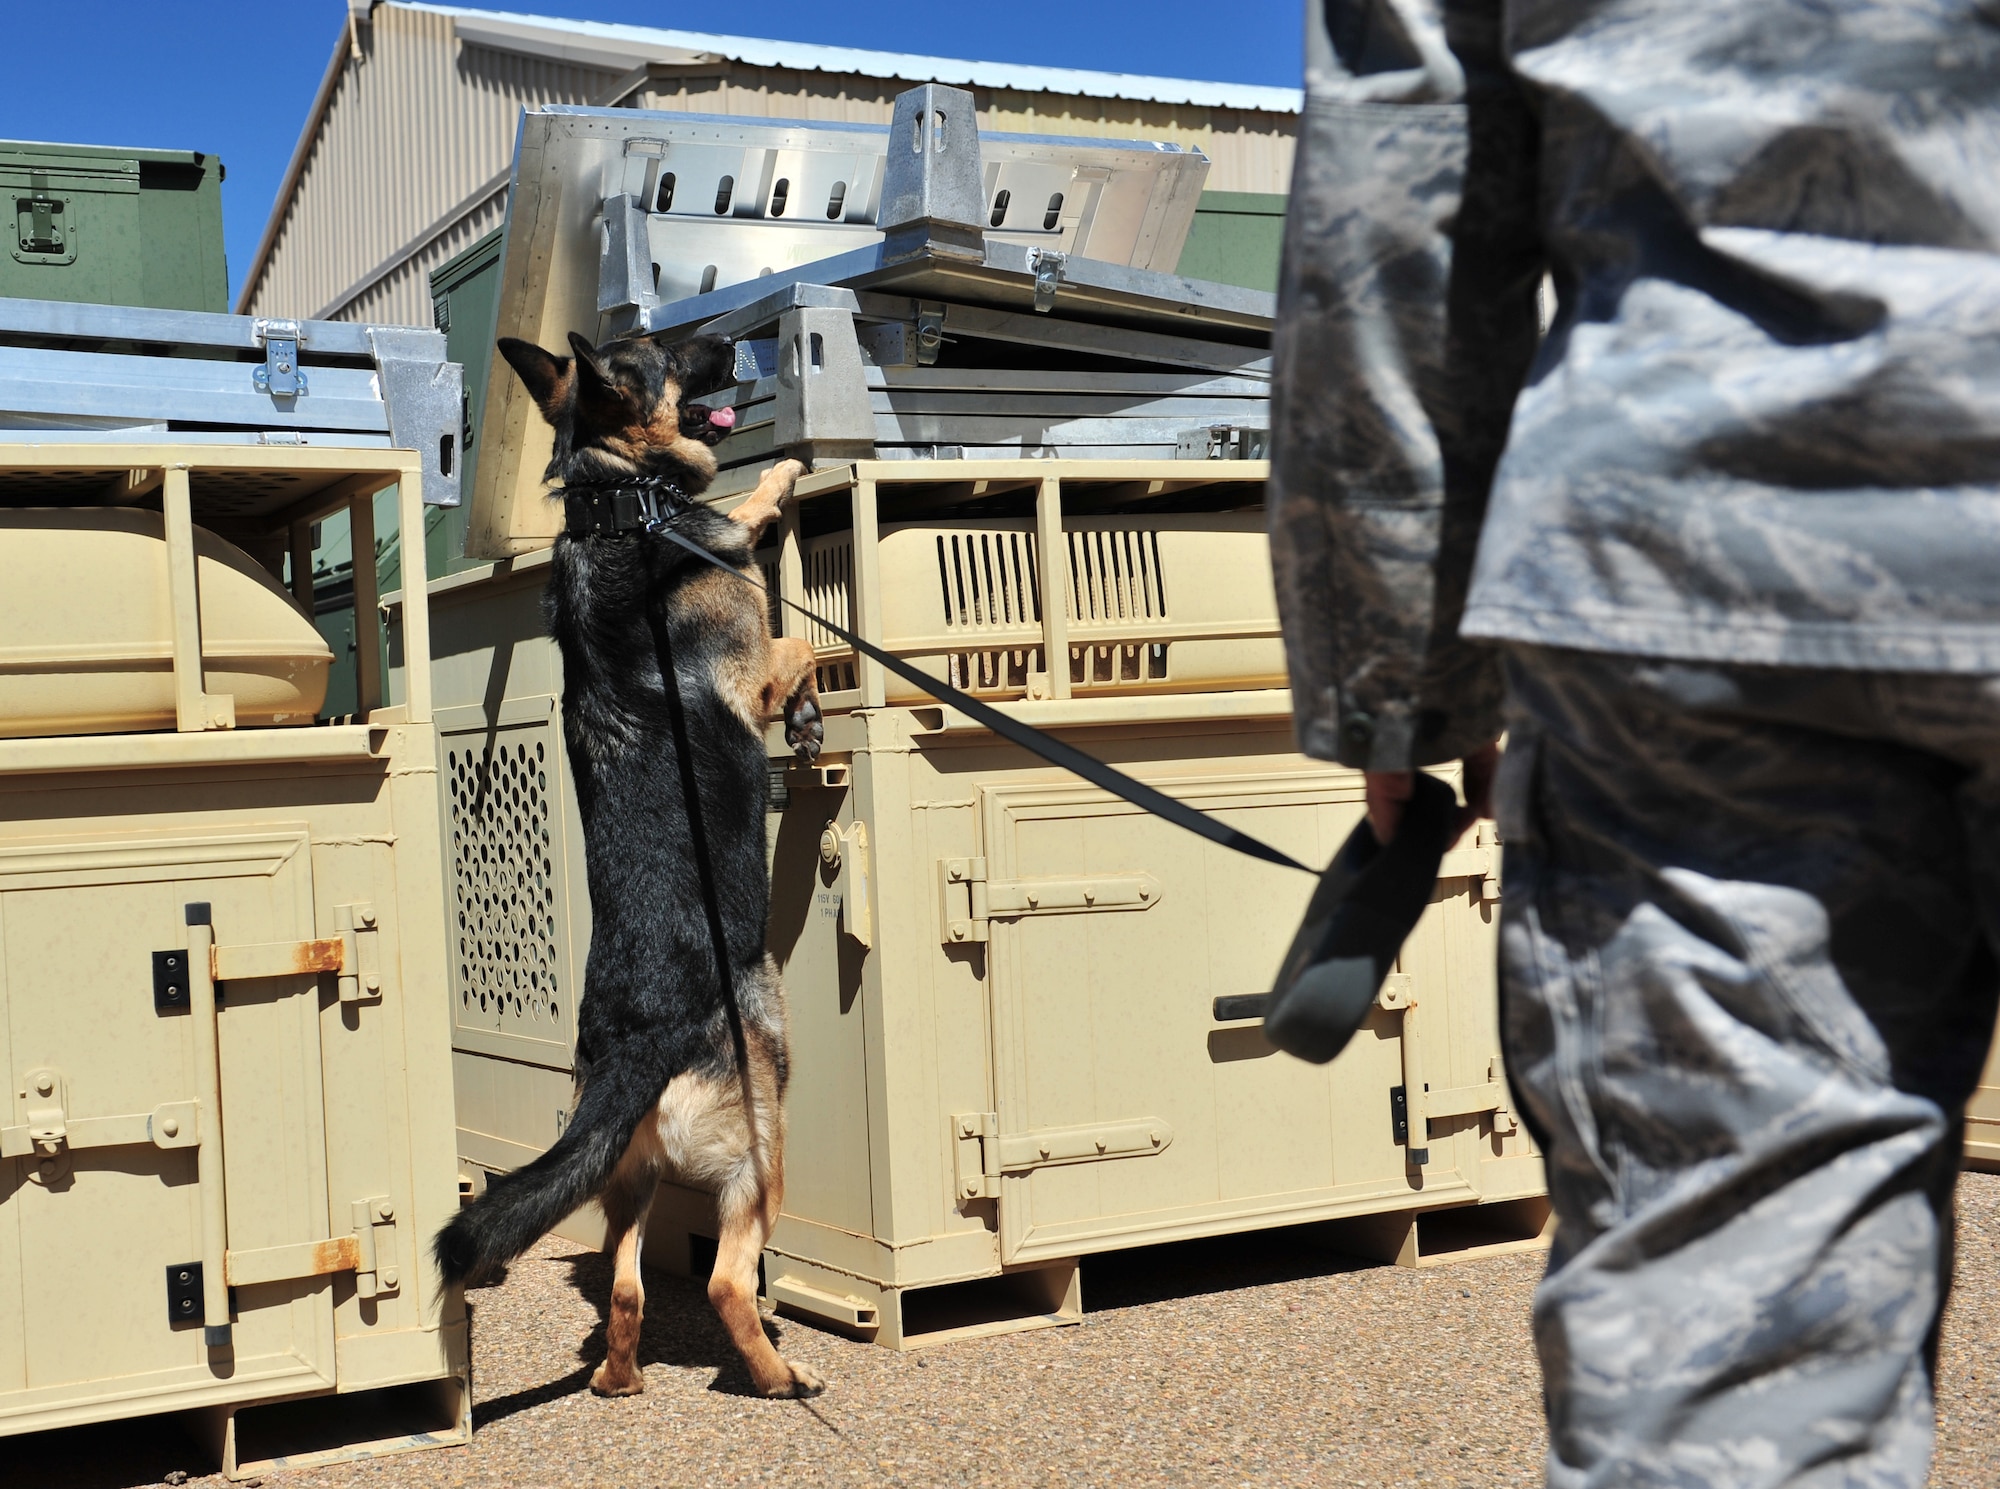 U.S. Air Force Staff Sgt. Steven Perez, 27th Special Operations Security Forces Squadron military working dog handler, performs a detection exercise with his K-9 unit near a warehouse at Cannon Air Force Base, N.M., March 15, 2012. All K-9 units assigned to Cannon are dual purpose patrol and detections canines responsible for protecting base personnel and resources. (U.S. Air Force photo by Airman 1st Class Alexxis Pons Abascal)